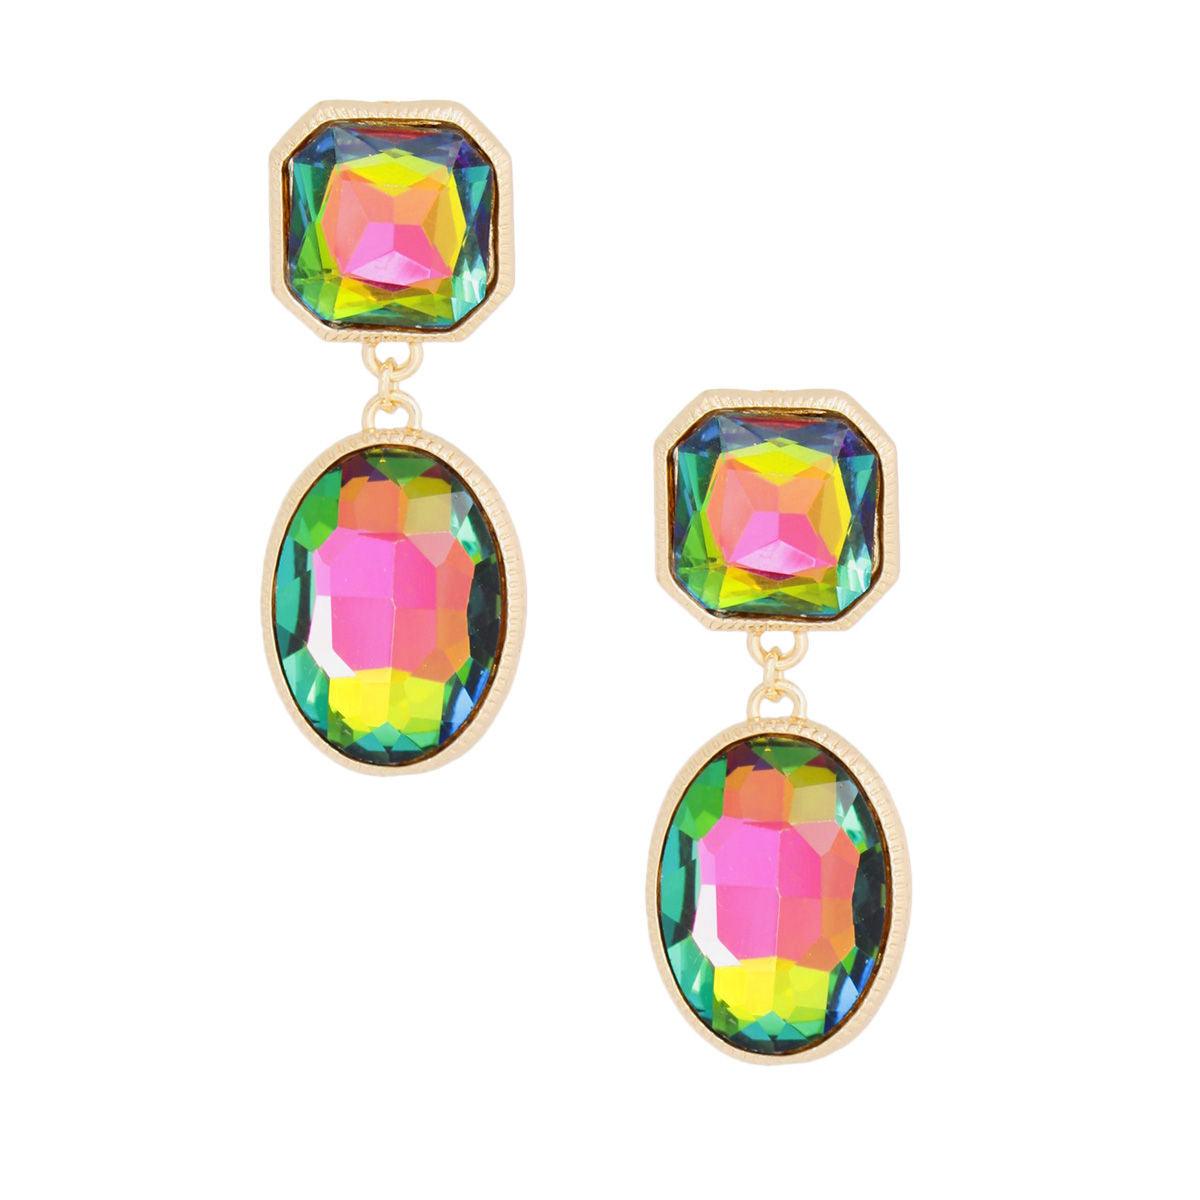 Pink-Green Passion: Clip-On Earrings for Stylish Statements!